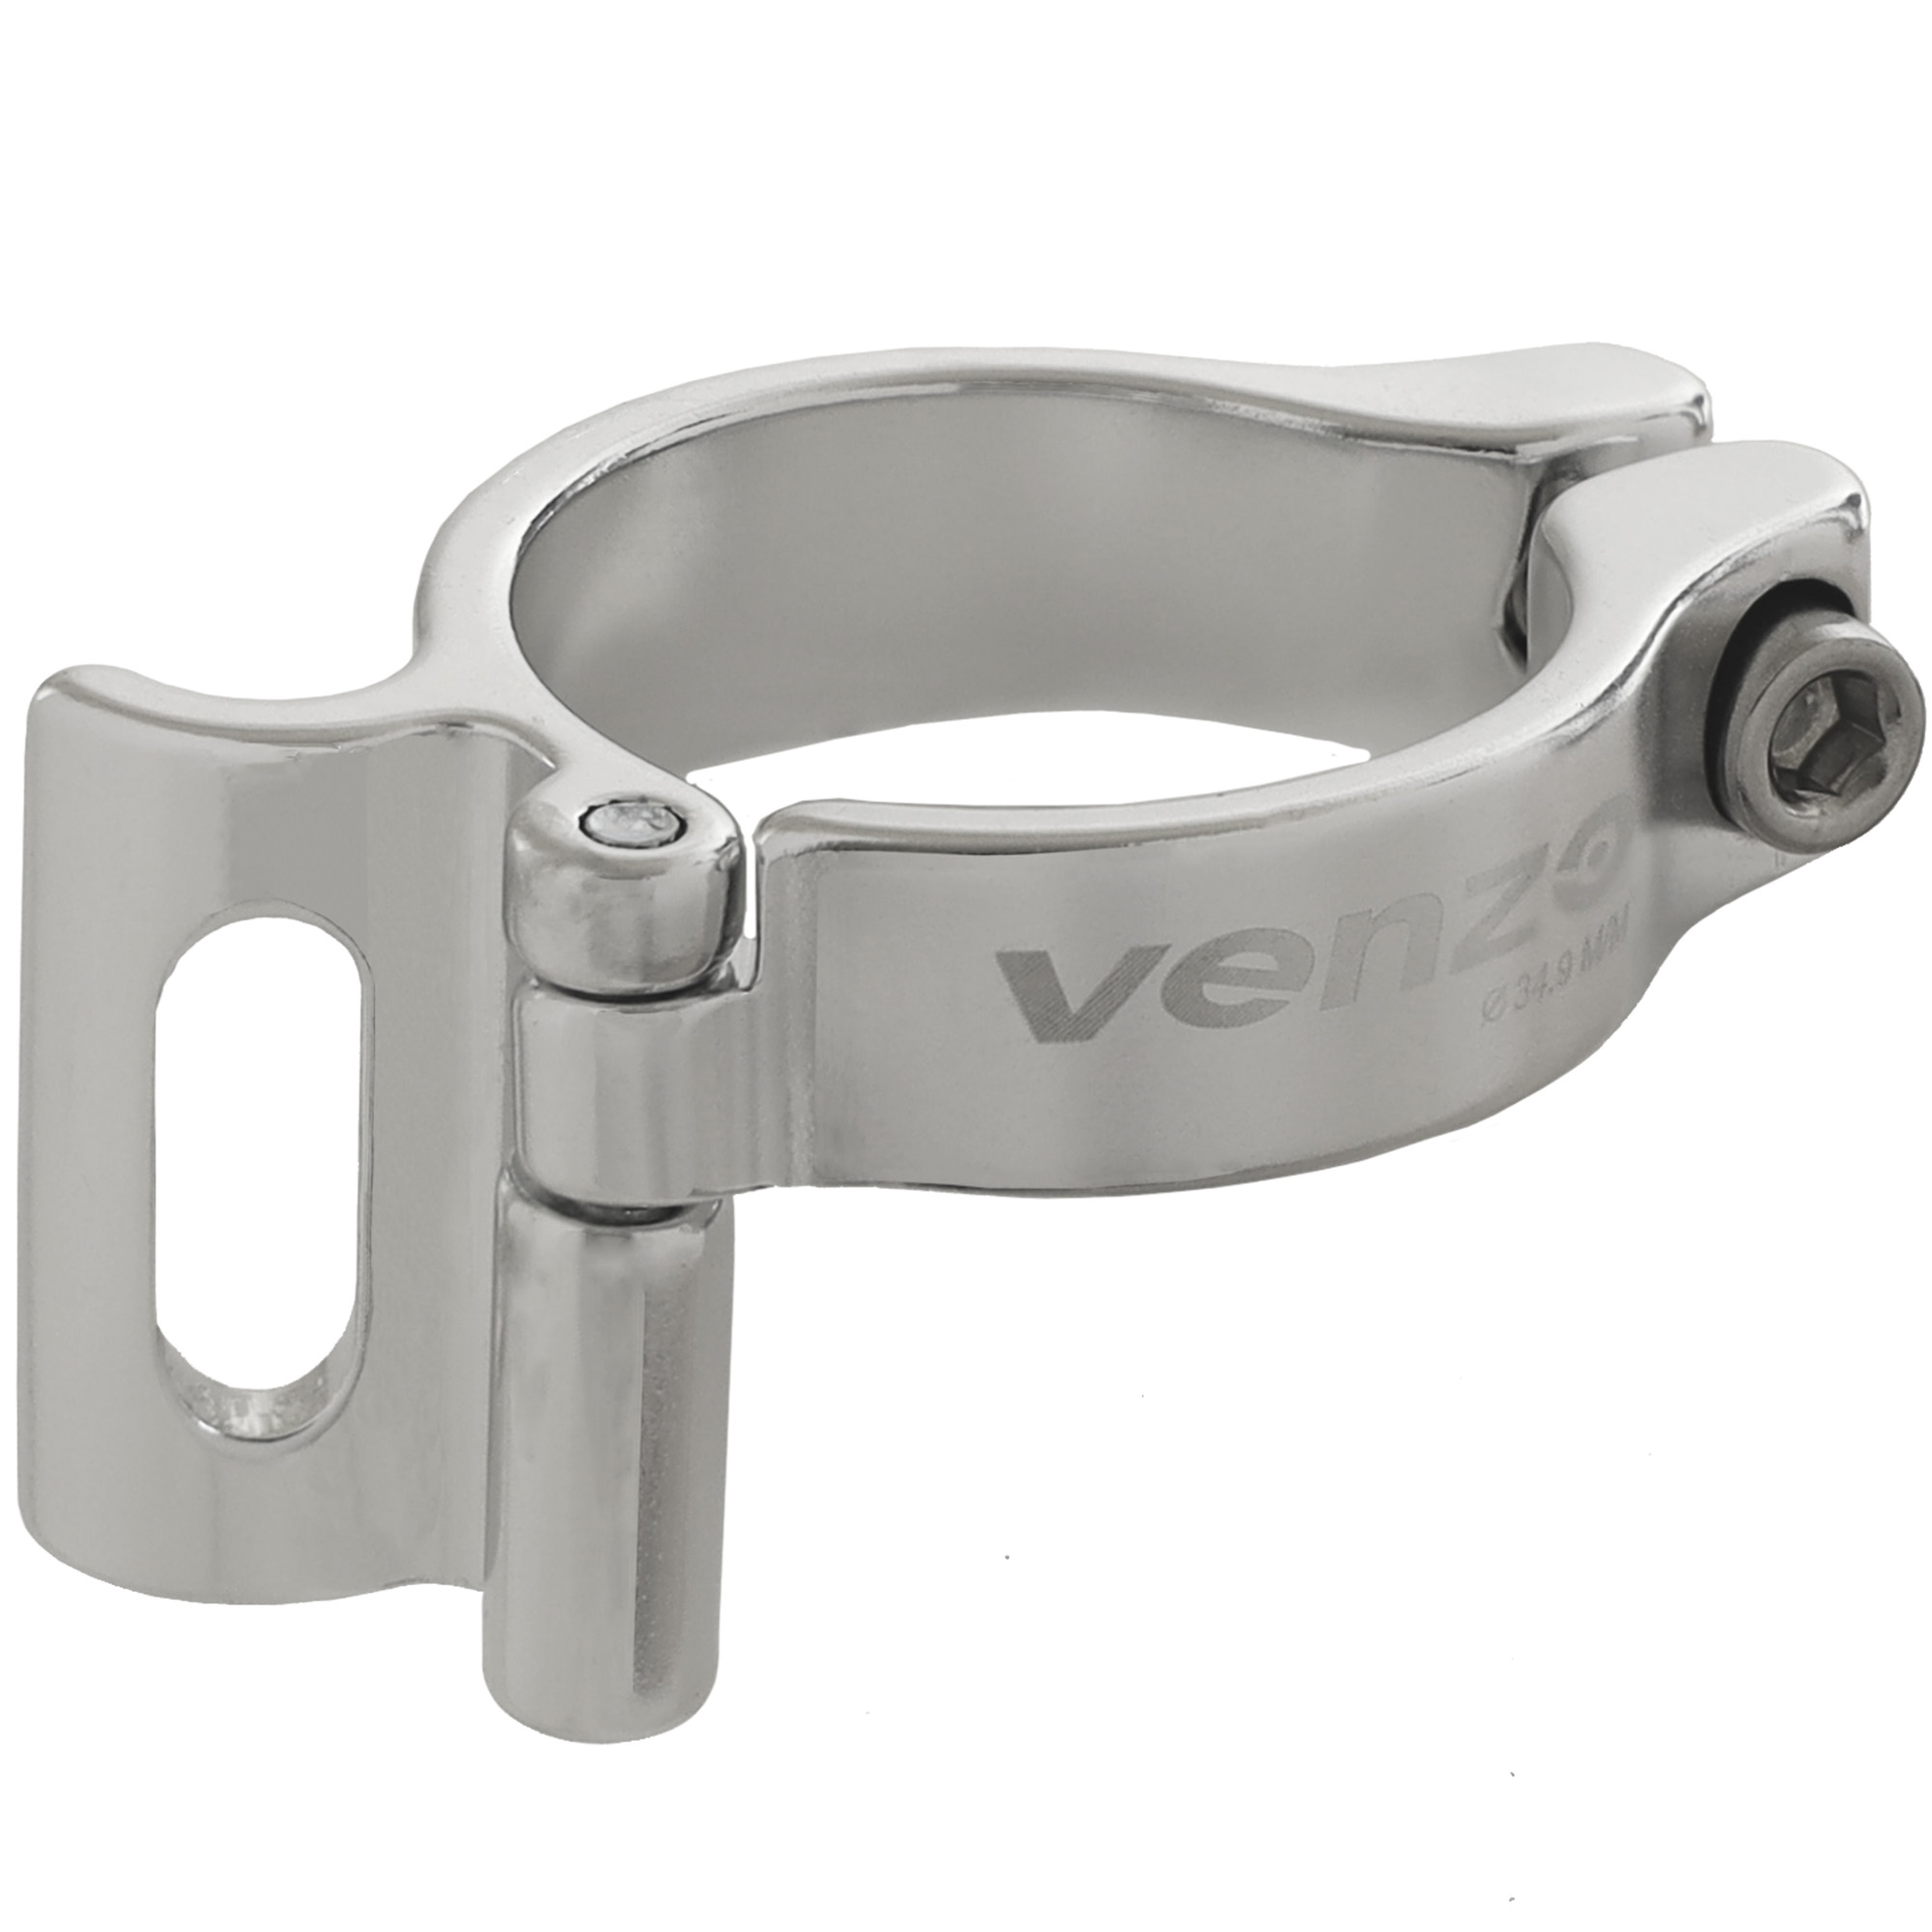 Venzo Road Mountain Bike Bicycle Adjustable Braze-on Front Derailleur Adapter Clamp 34.9mm Silver